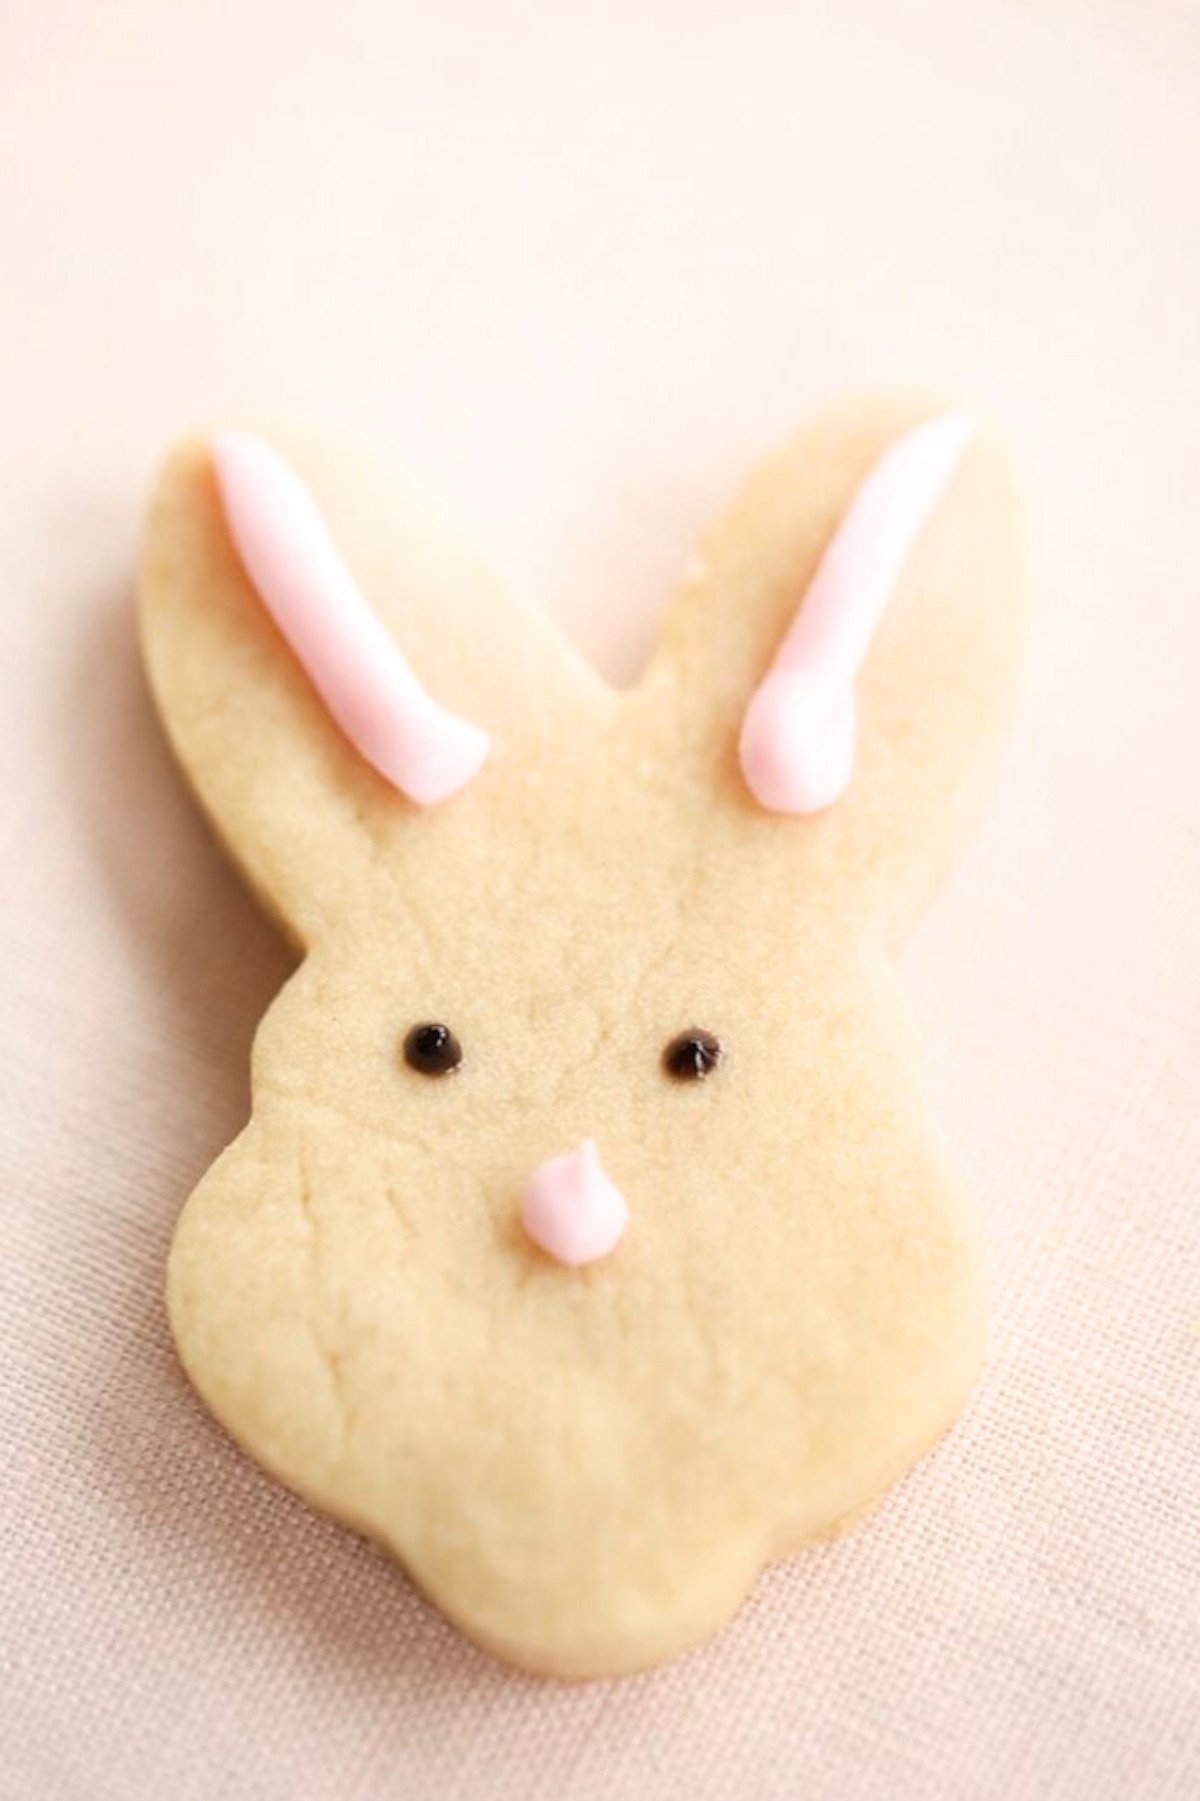 An Easter shortbread cookie in the shape of a bunny face.